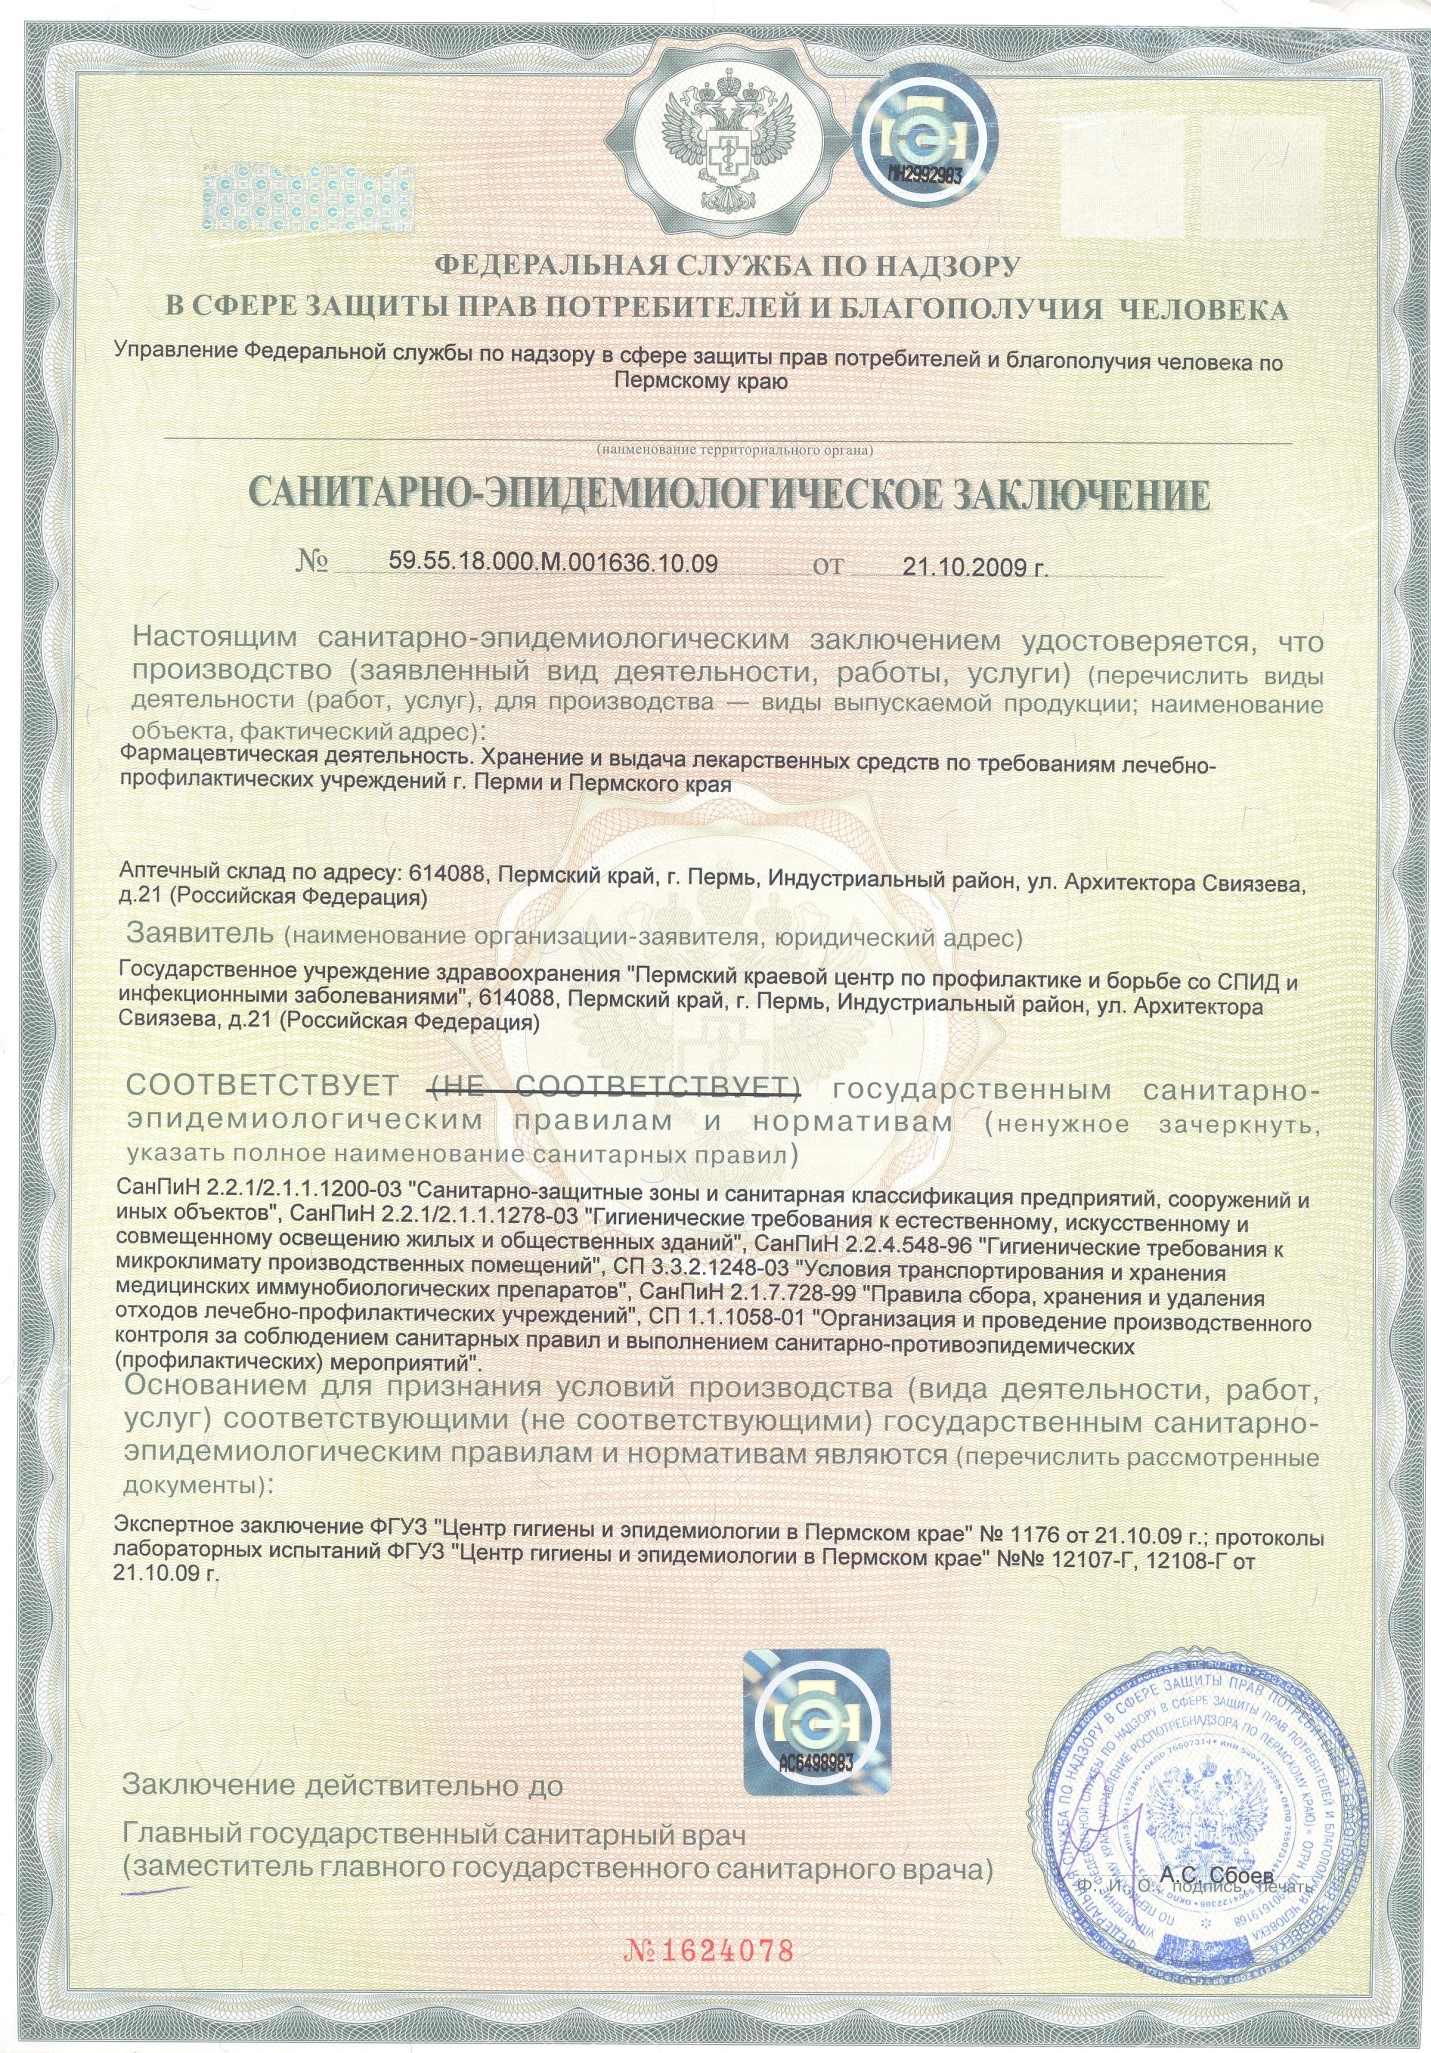 Sanitary-epidemiological certificate4